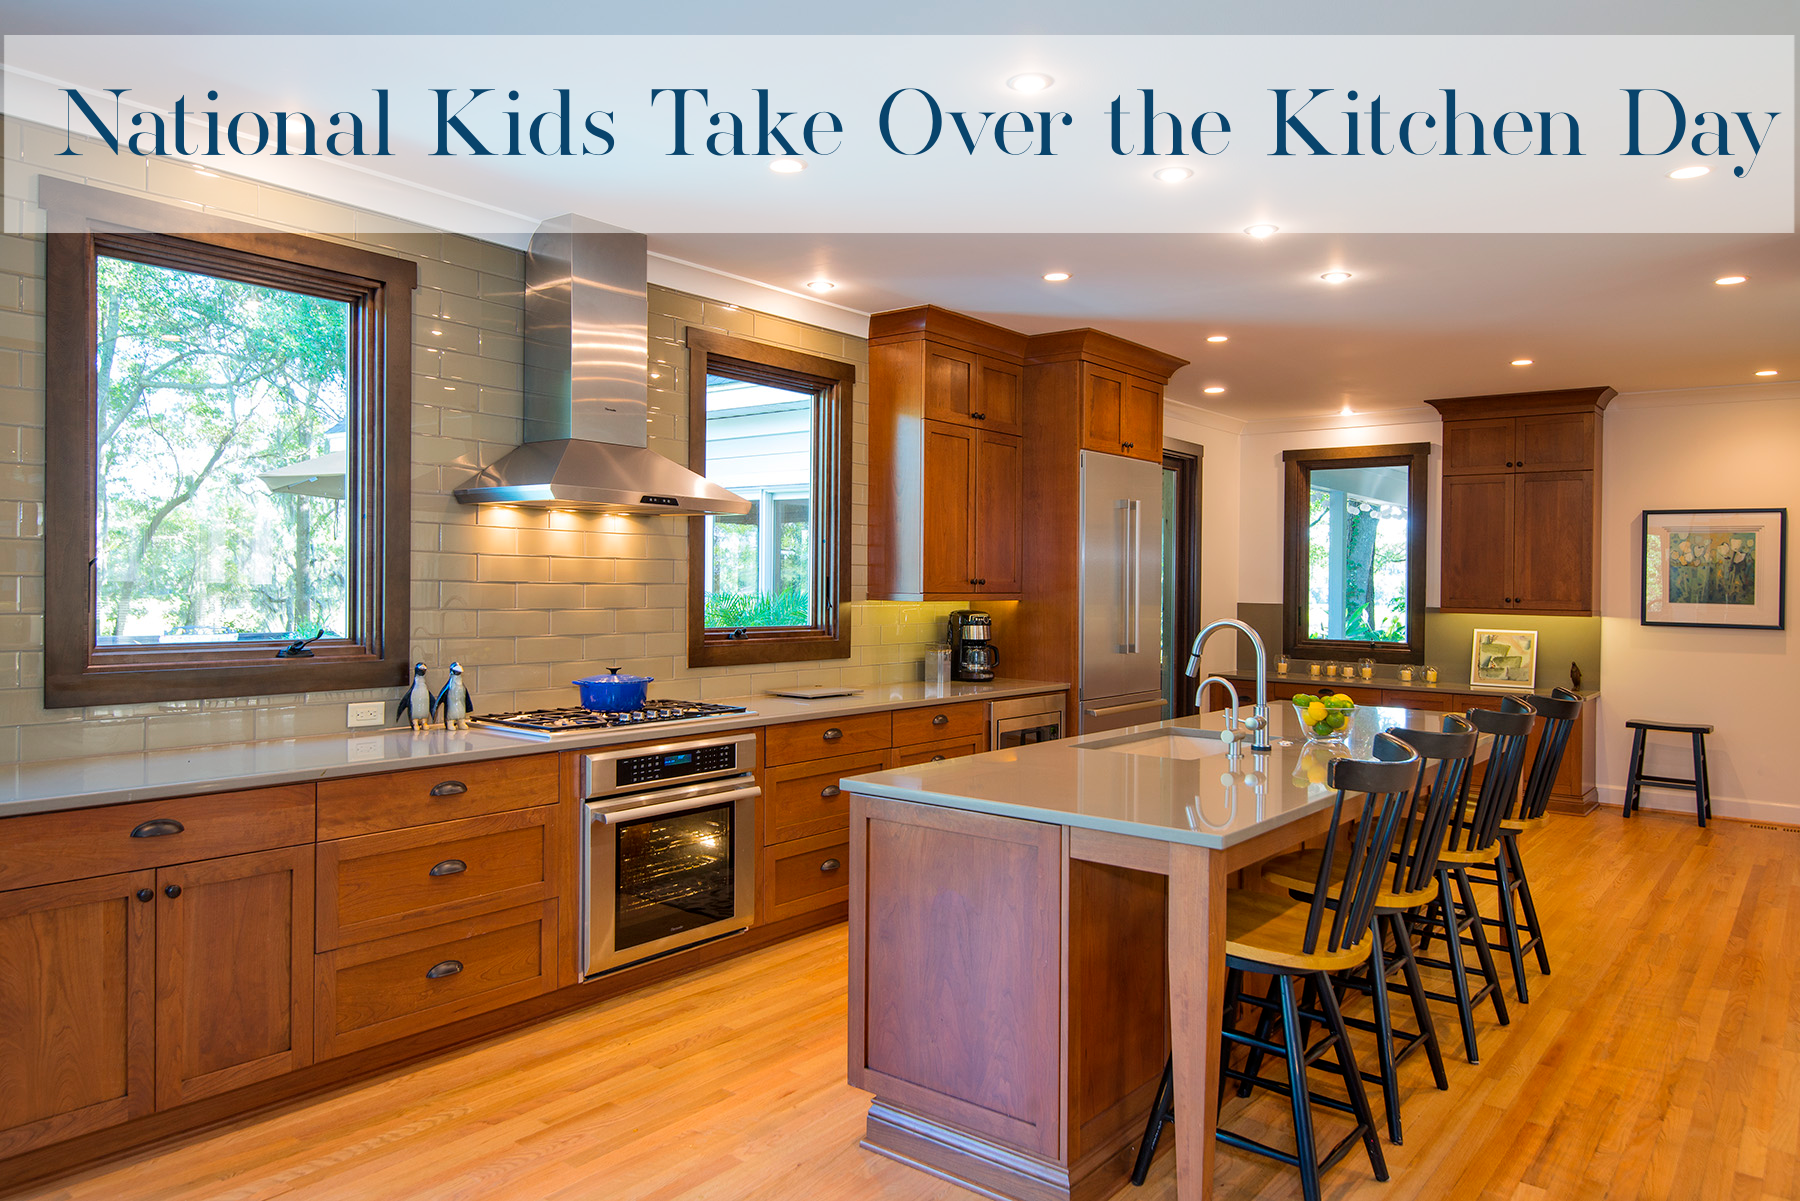 Kids Take Over the Kitchen Day: 5 Elements of a Kid-Friendly Kitchen